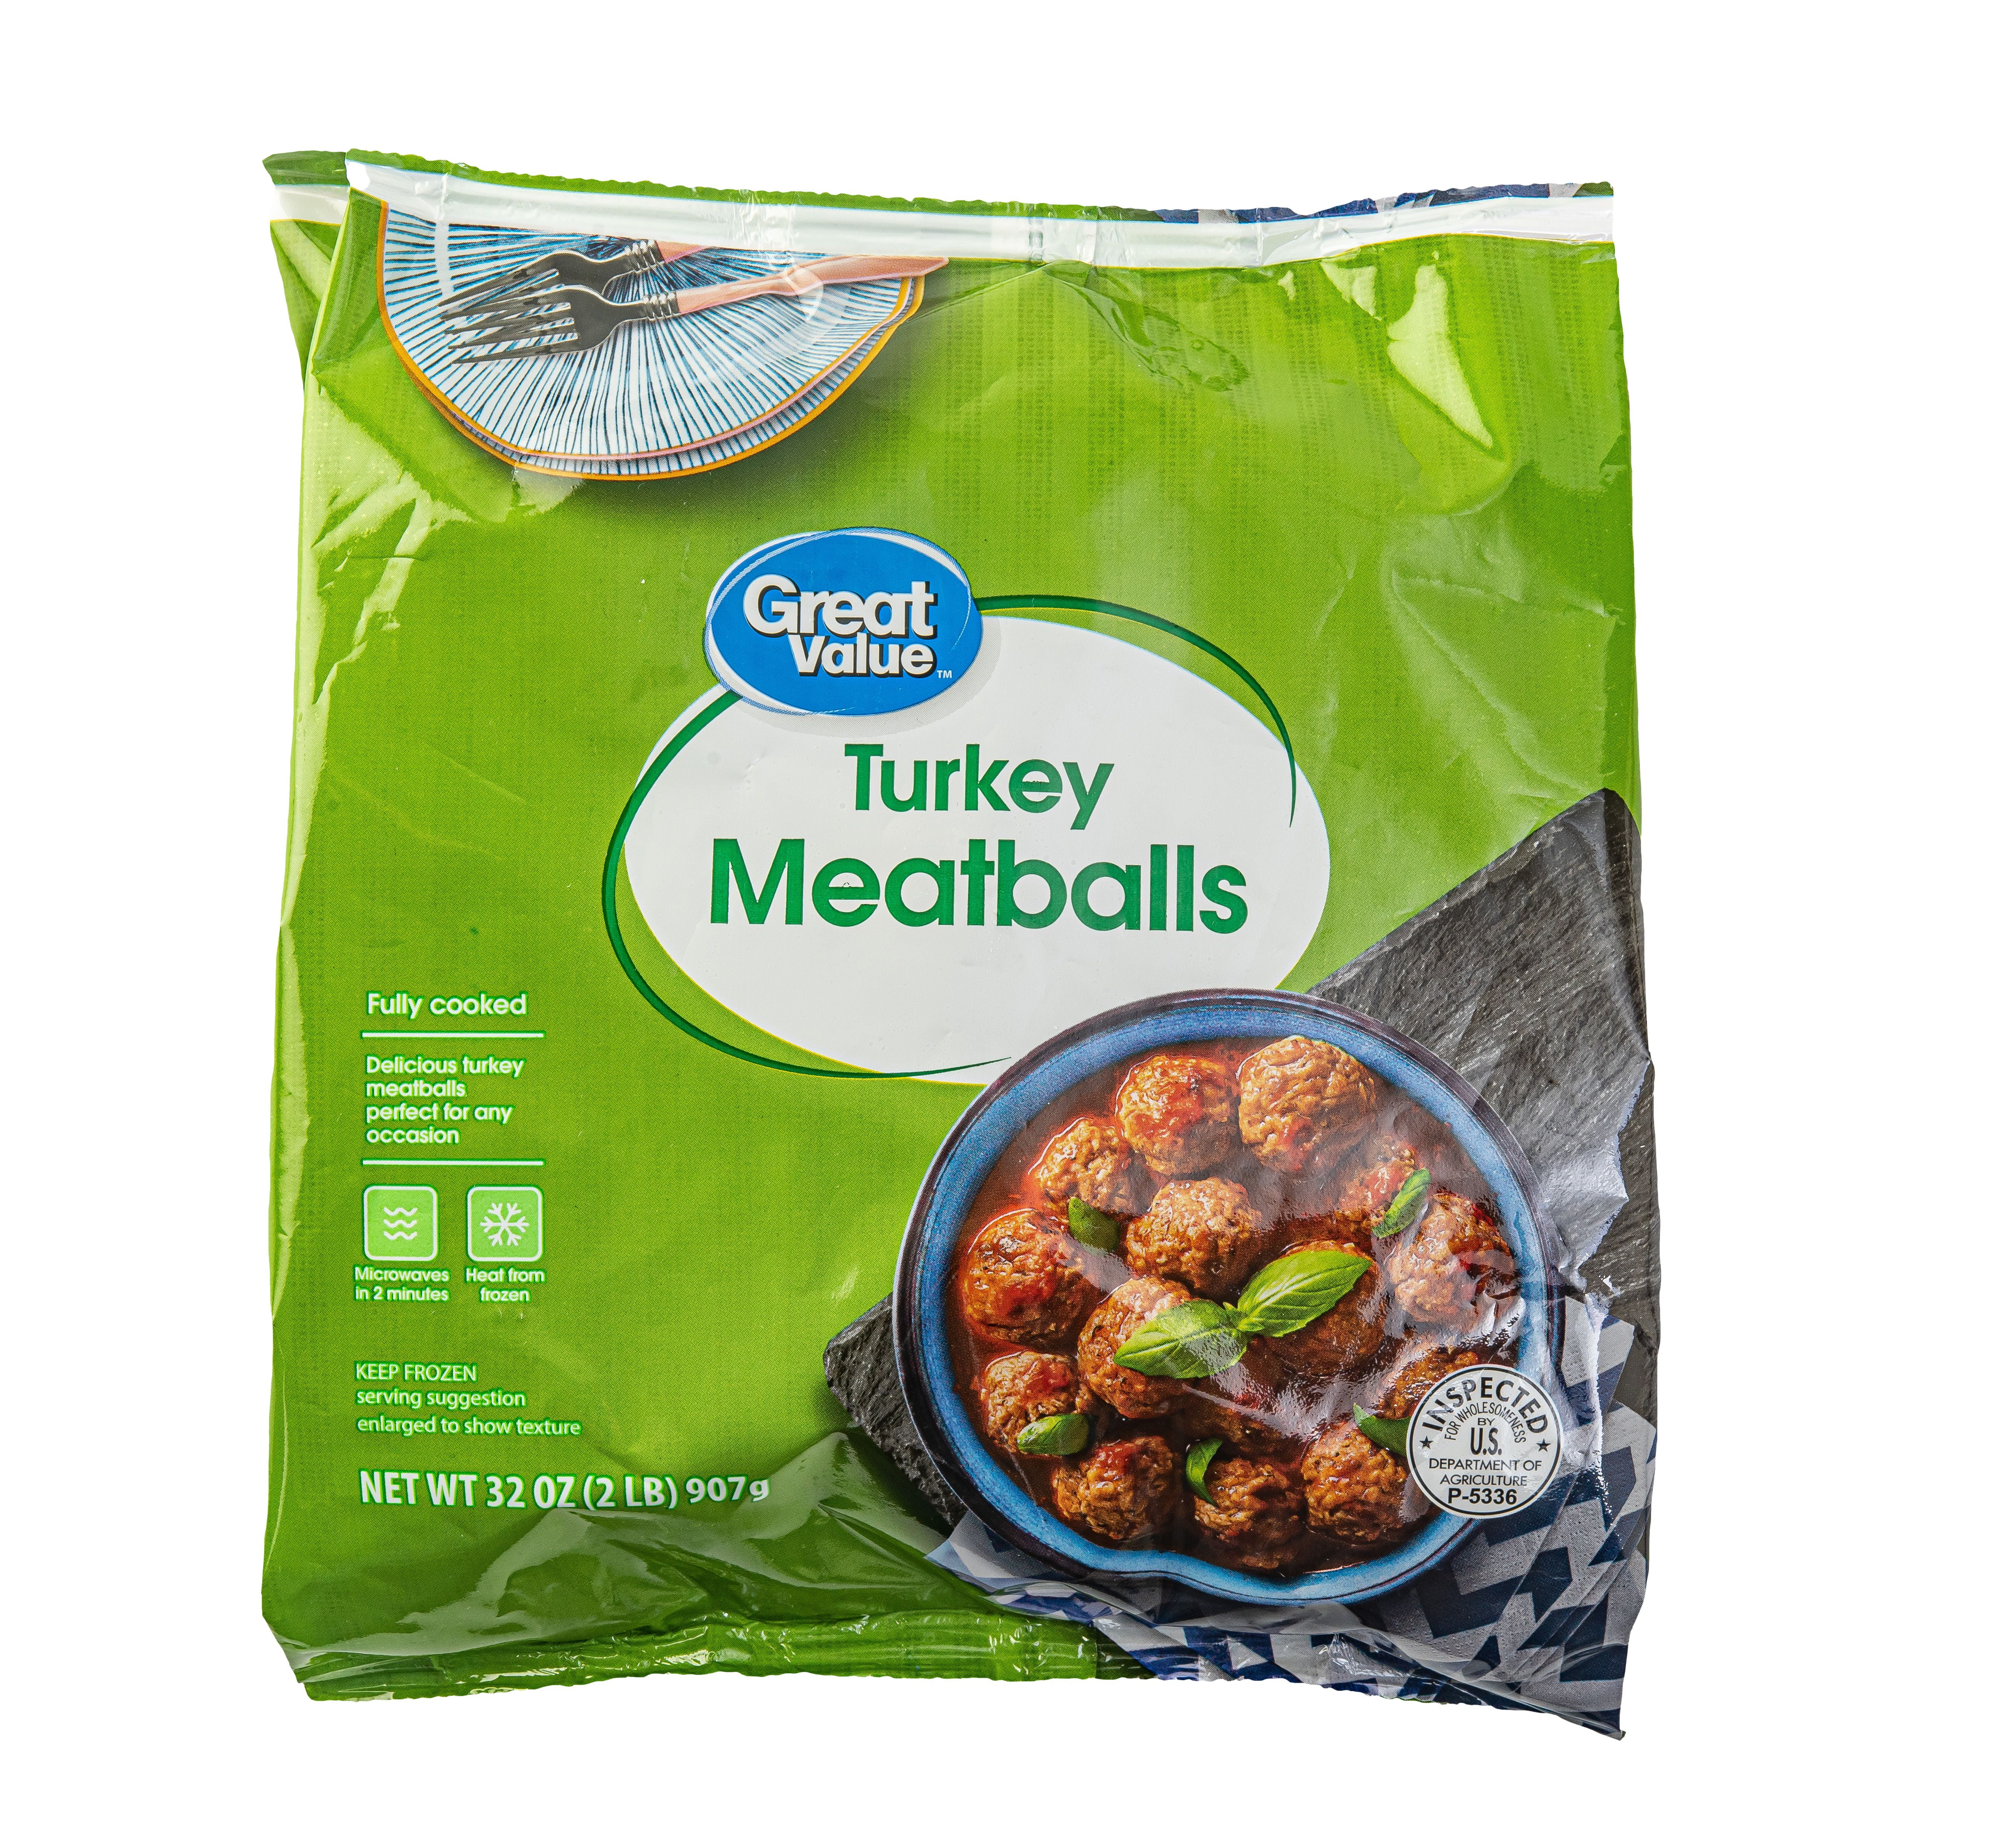 Great Value Fully Cooked Turkey Meatballs, Frozen, 32 ounces, approx. 64 meatballs